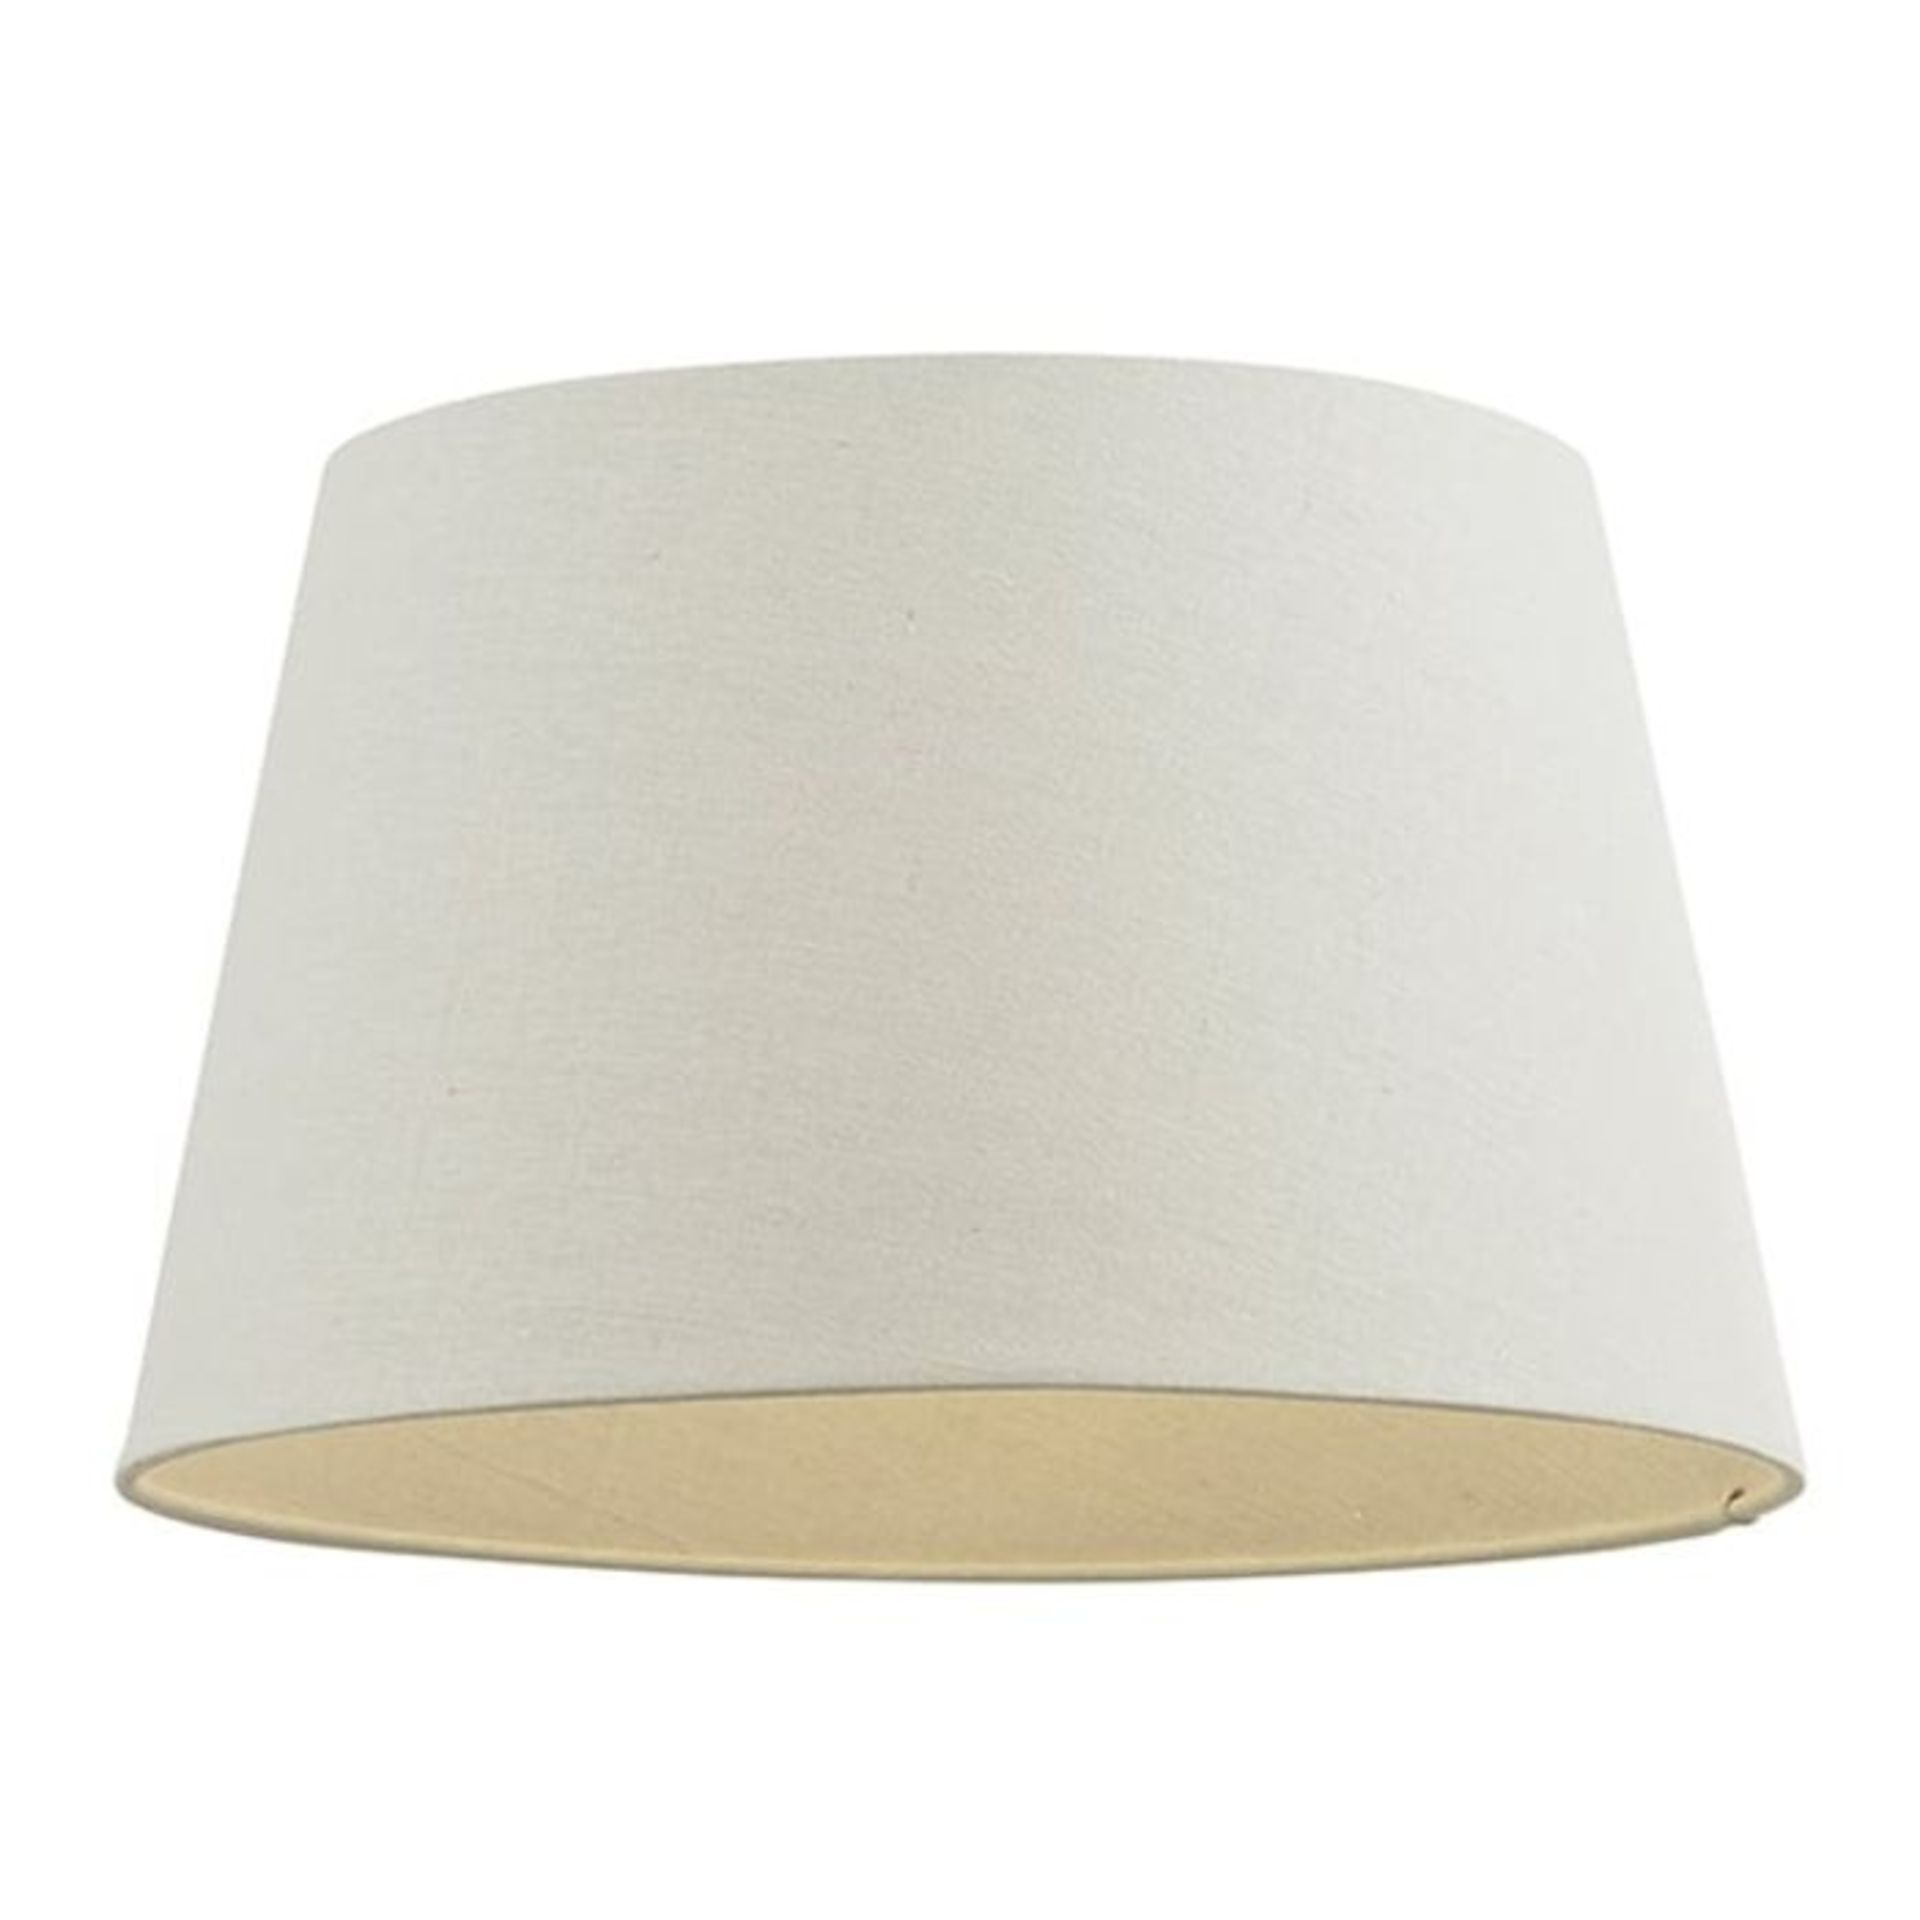 Set of 2 Cylinder Table Lamp Shade (CREAM) (45cm) (SHADE ONLY NO BASE INCLUDED) E27 60W (467/3 -